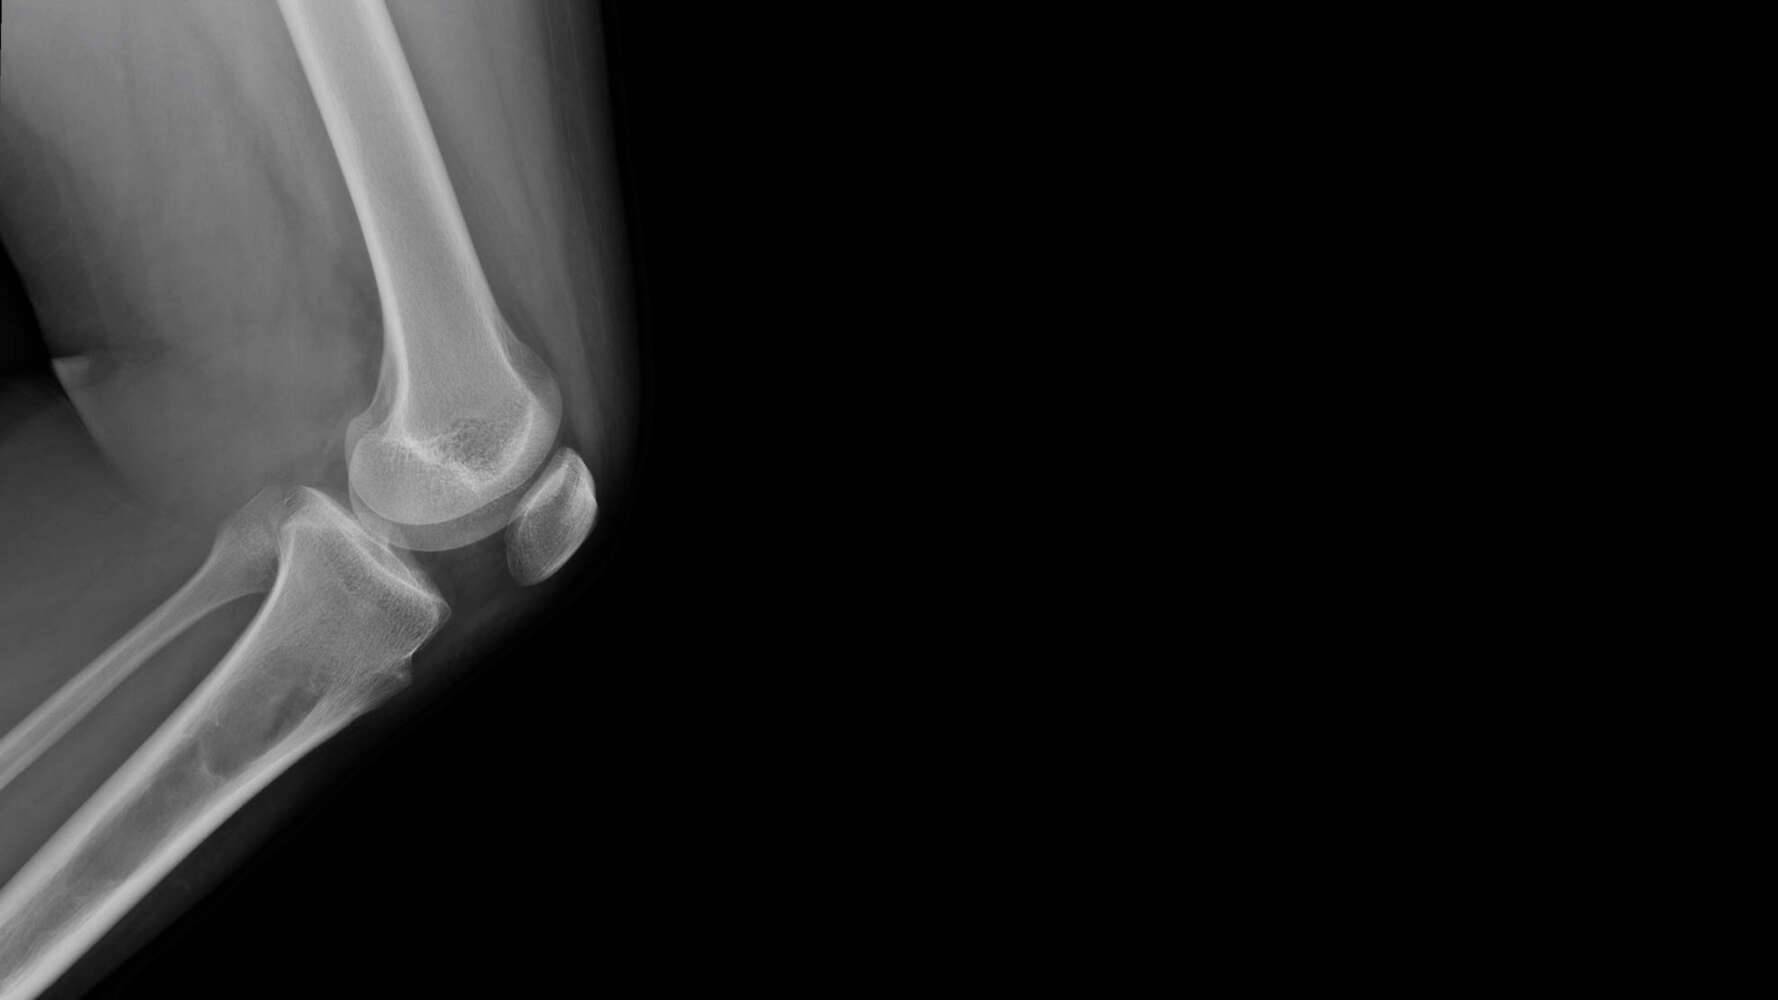 Film X ray knee radiograph show Fibrous dysplasia(FD) disease wh